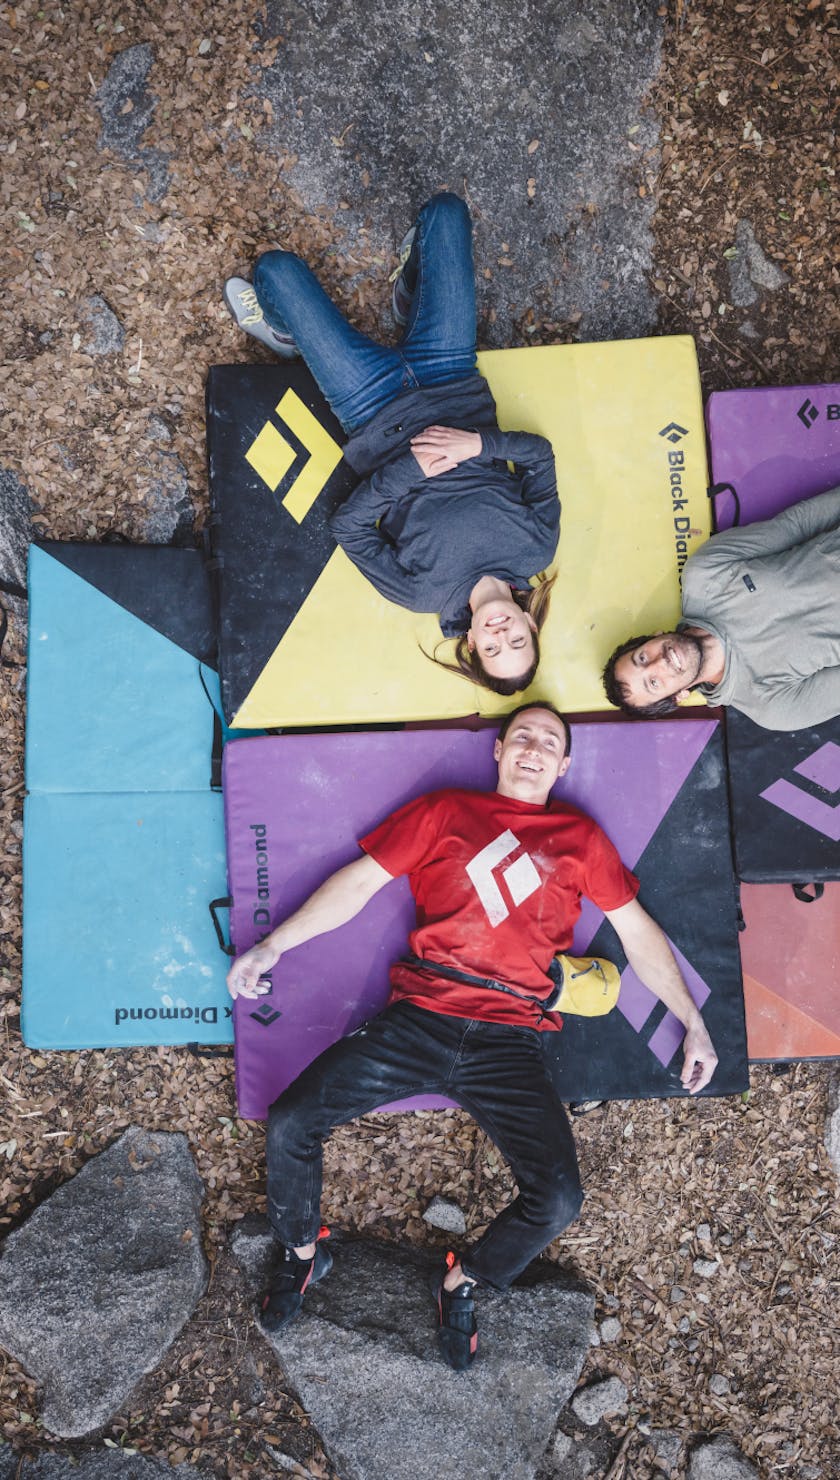 A Group of people laying on Circuit Crash Pad